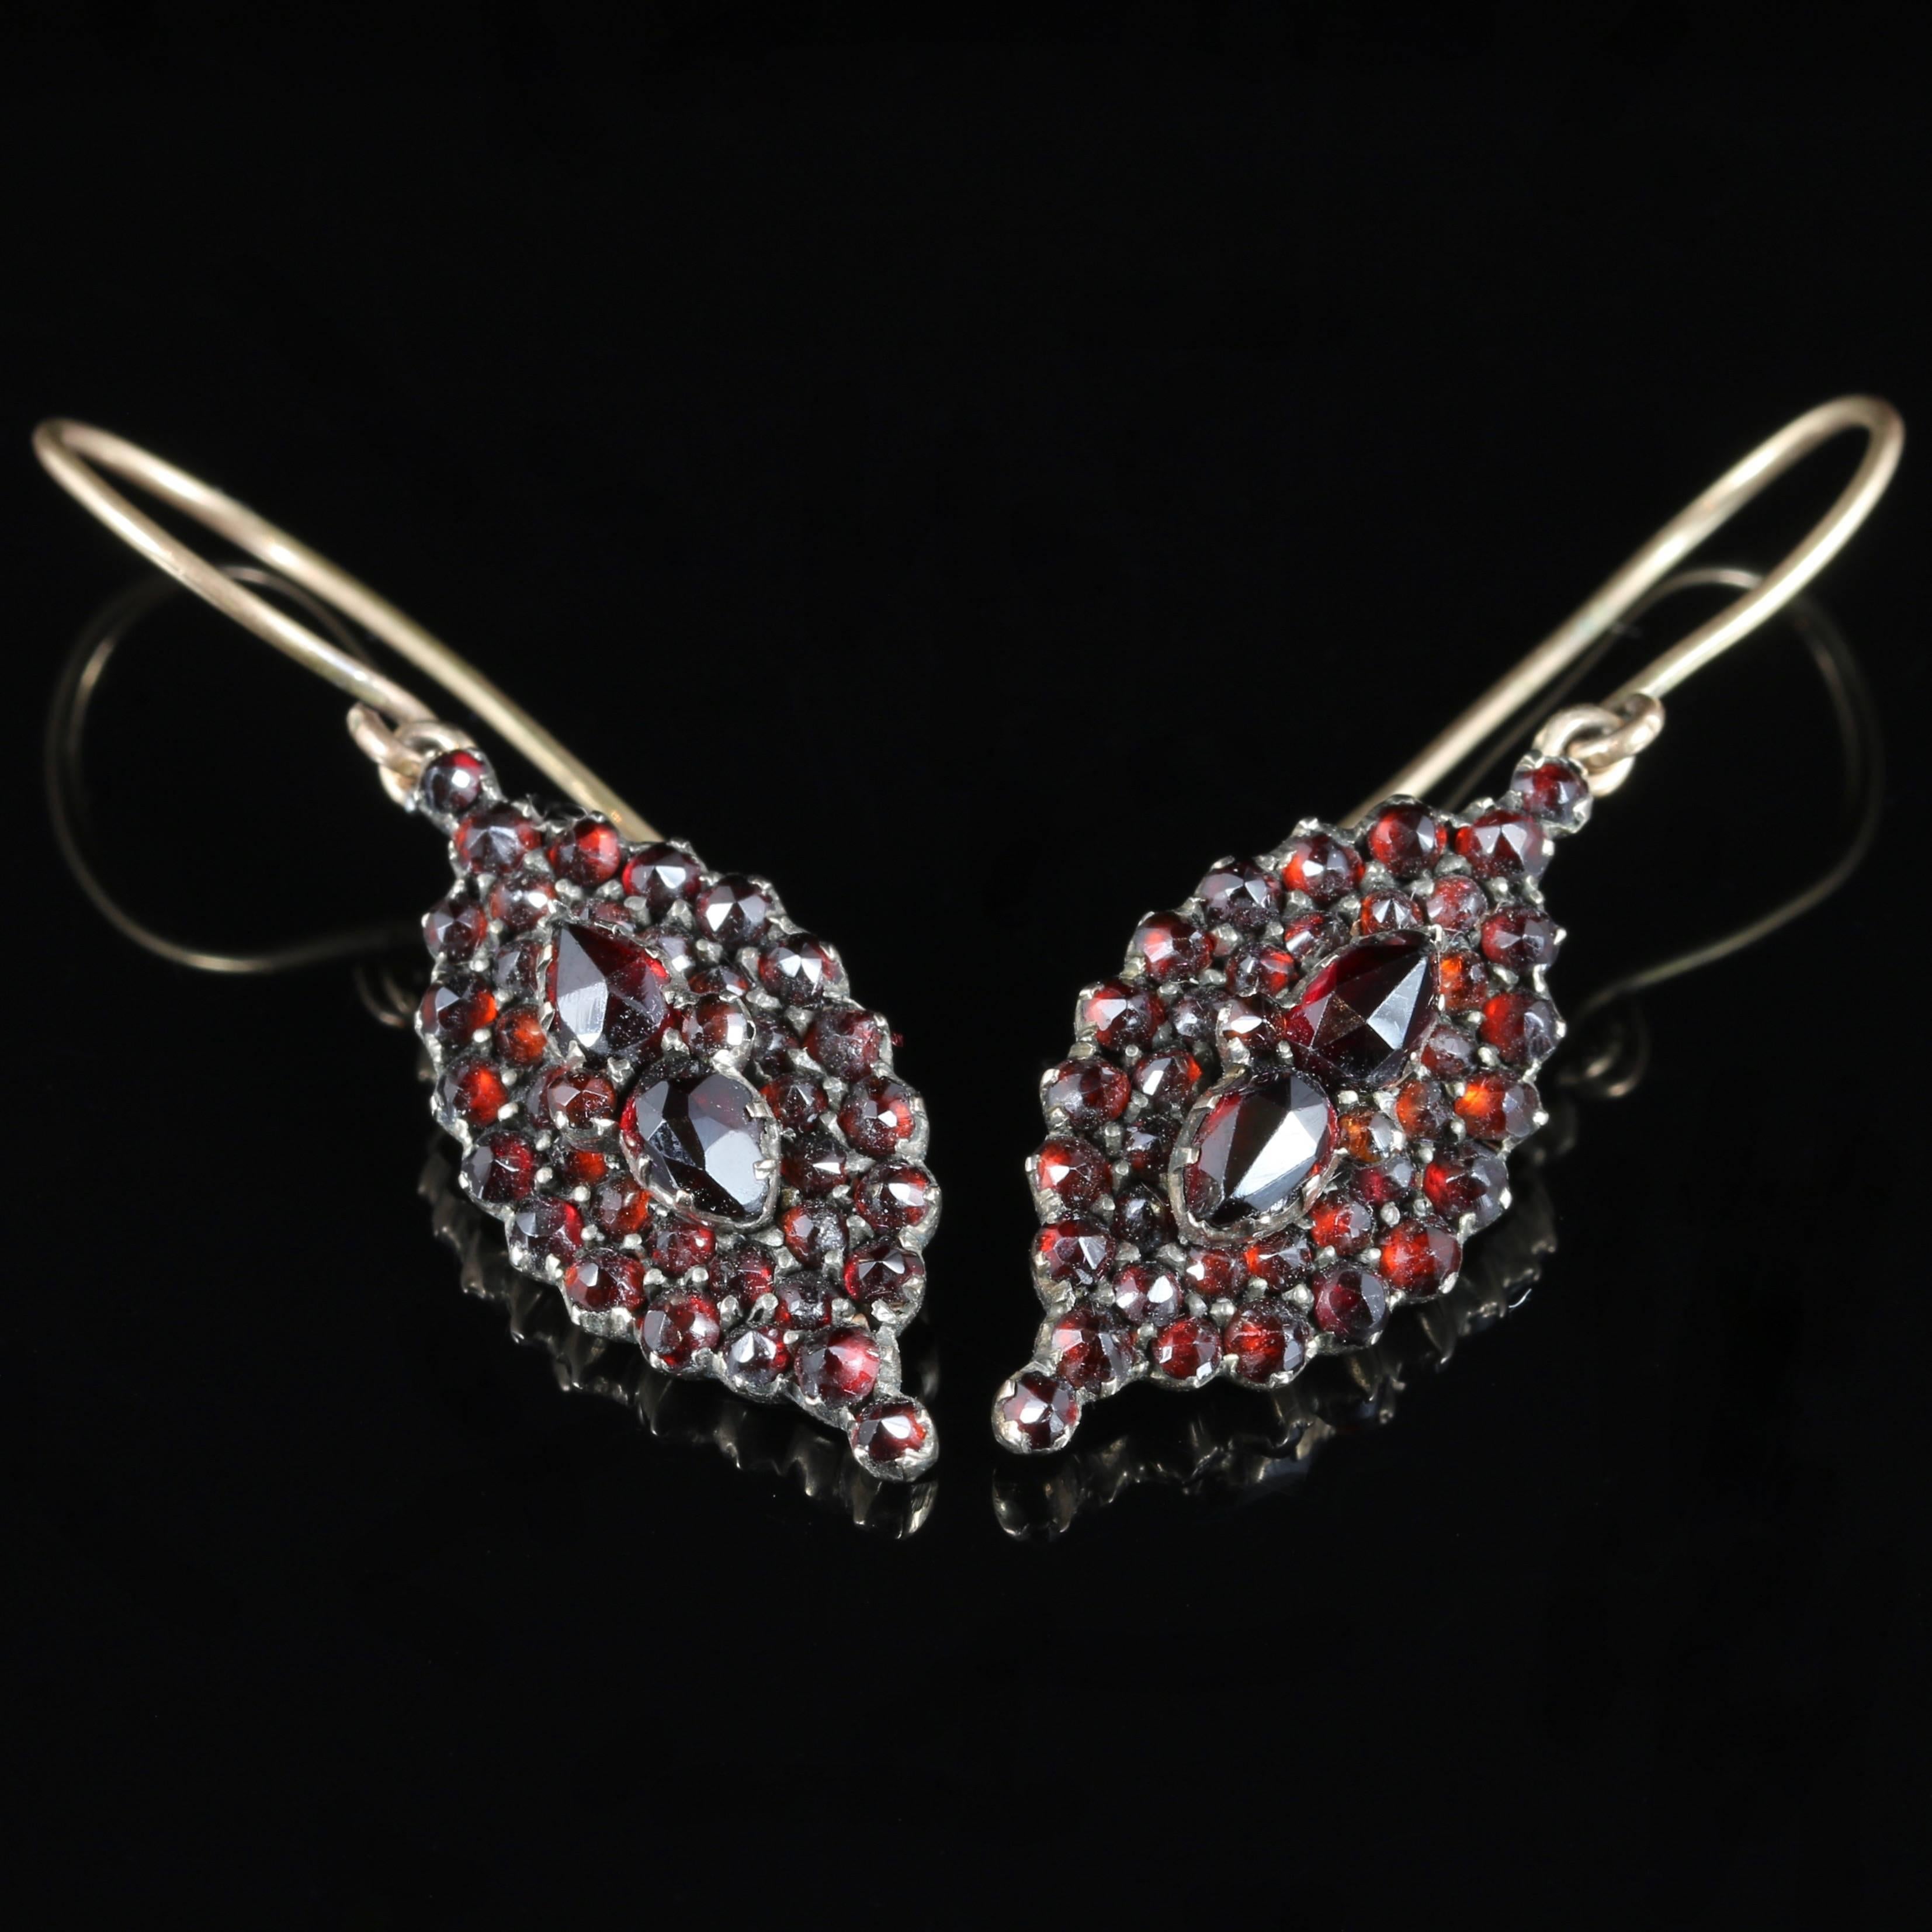 These fabulous Victorian marquise shaped deep red Garnet and Gold earrings are Circa 1900

Lovely deep red Garnets adorn these fabulous earrings.

The Garnet is a stone of purity and truth as well as a symbol of love and compassion. The Garnet will